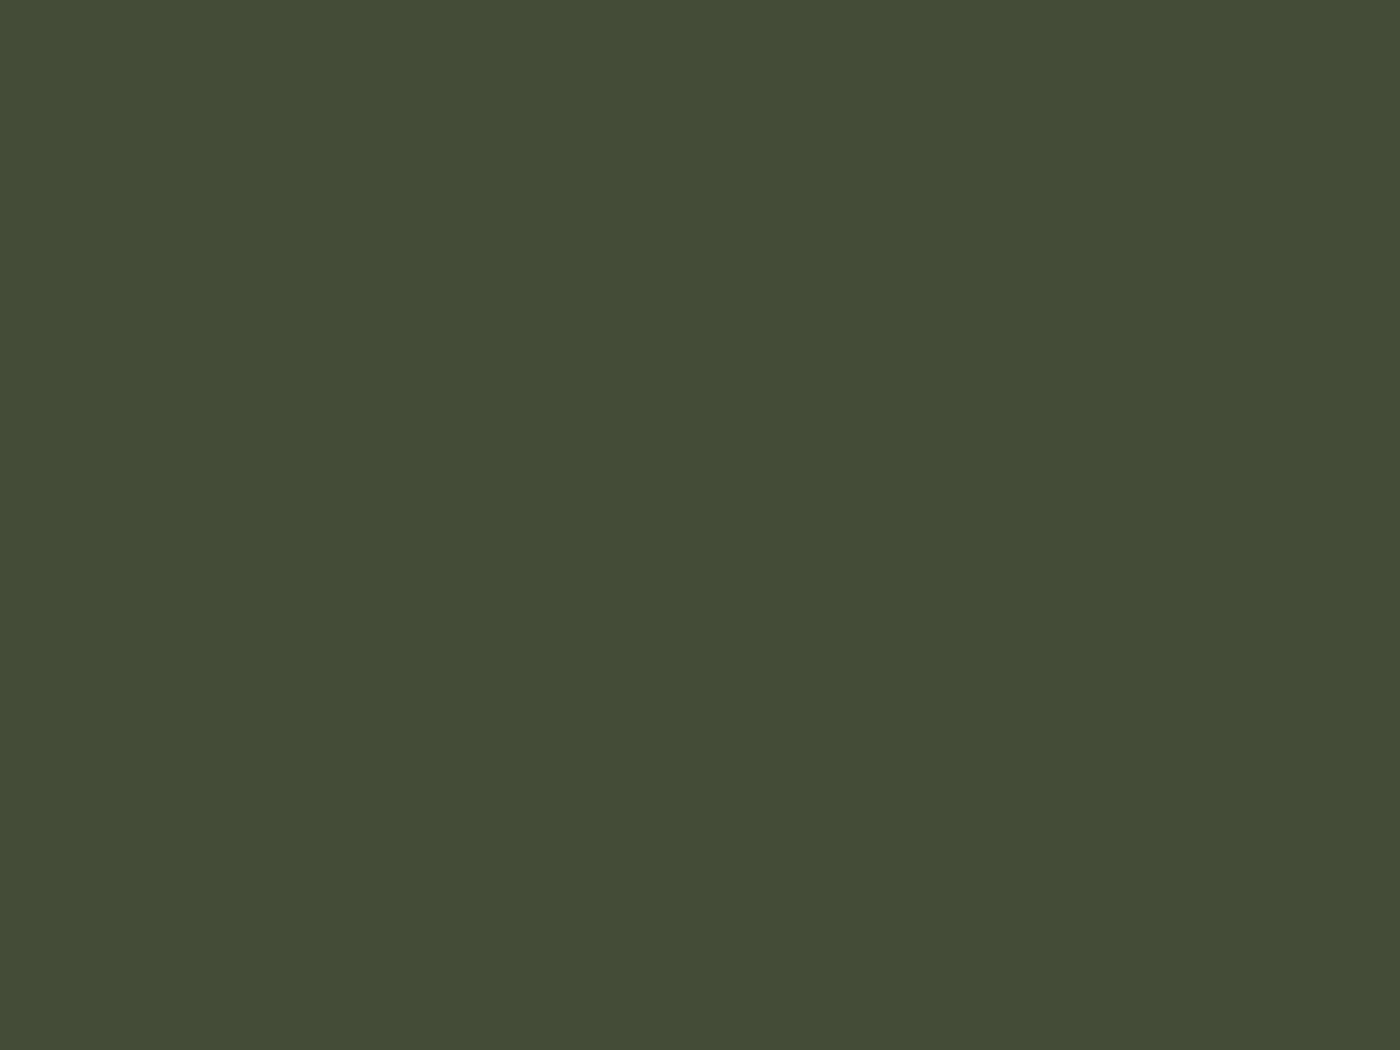 1400x1050 Rifle Green Solid Color Background